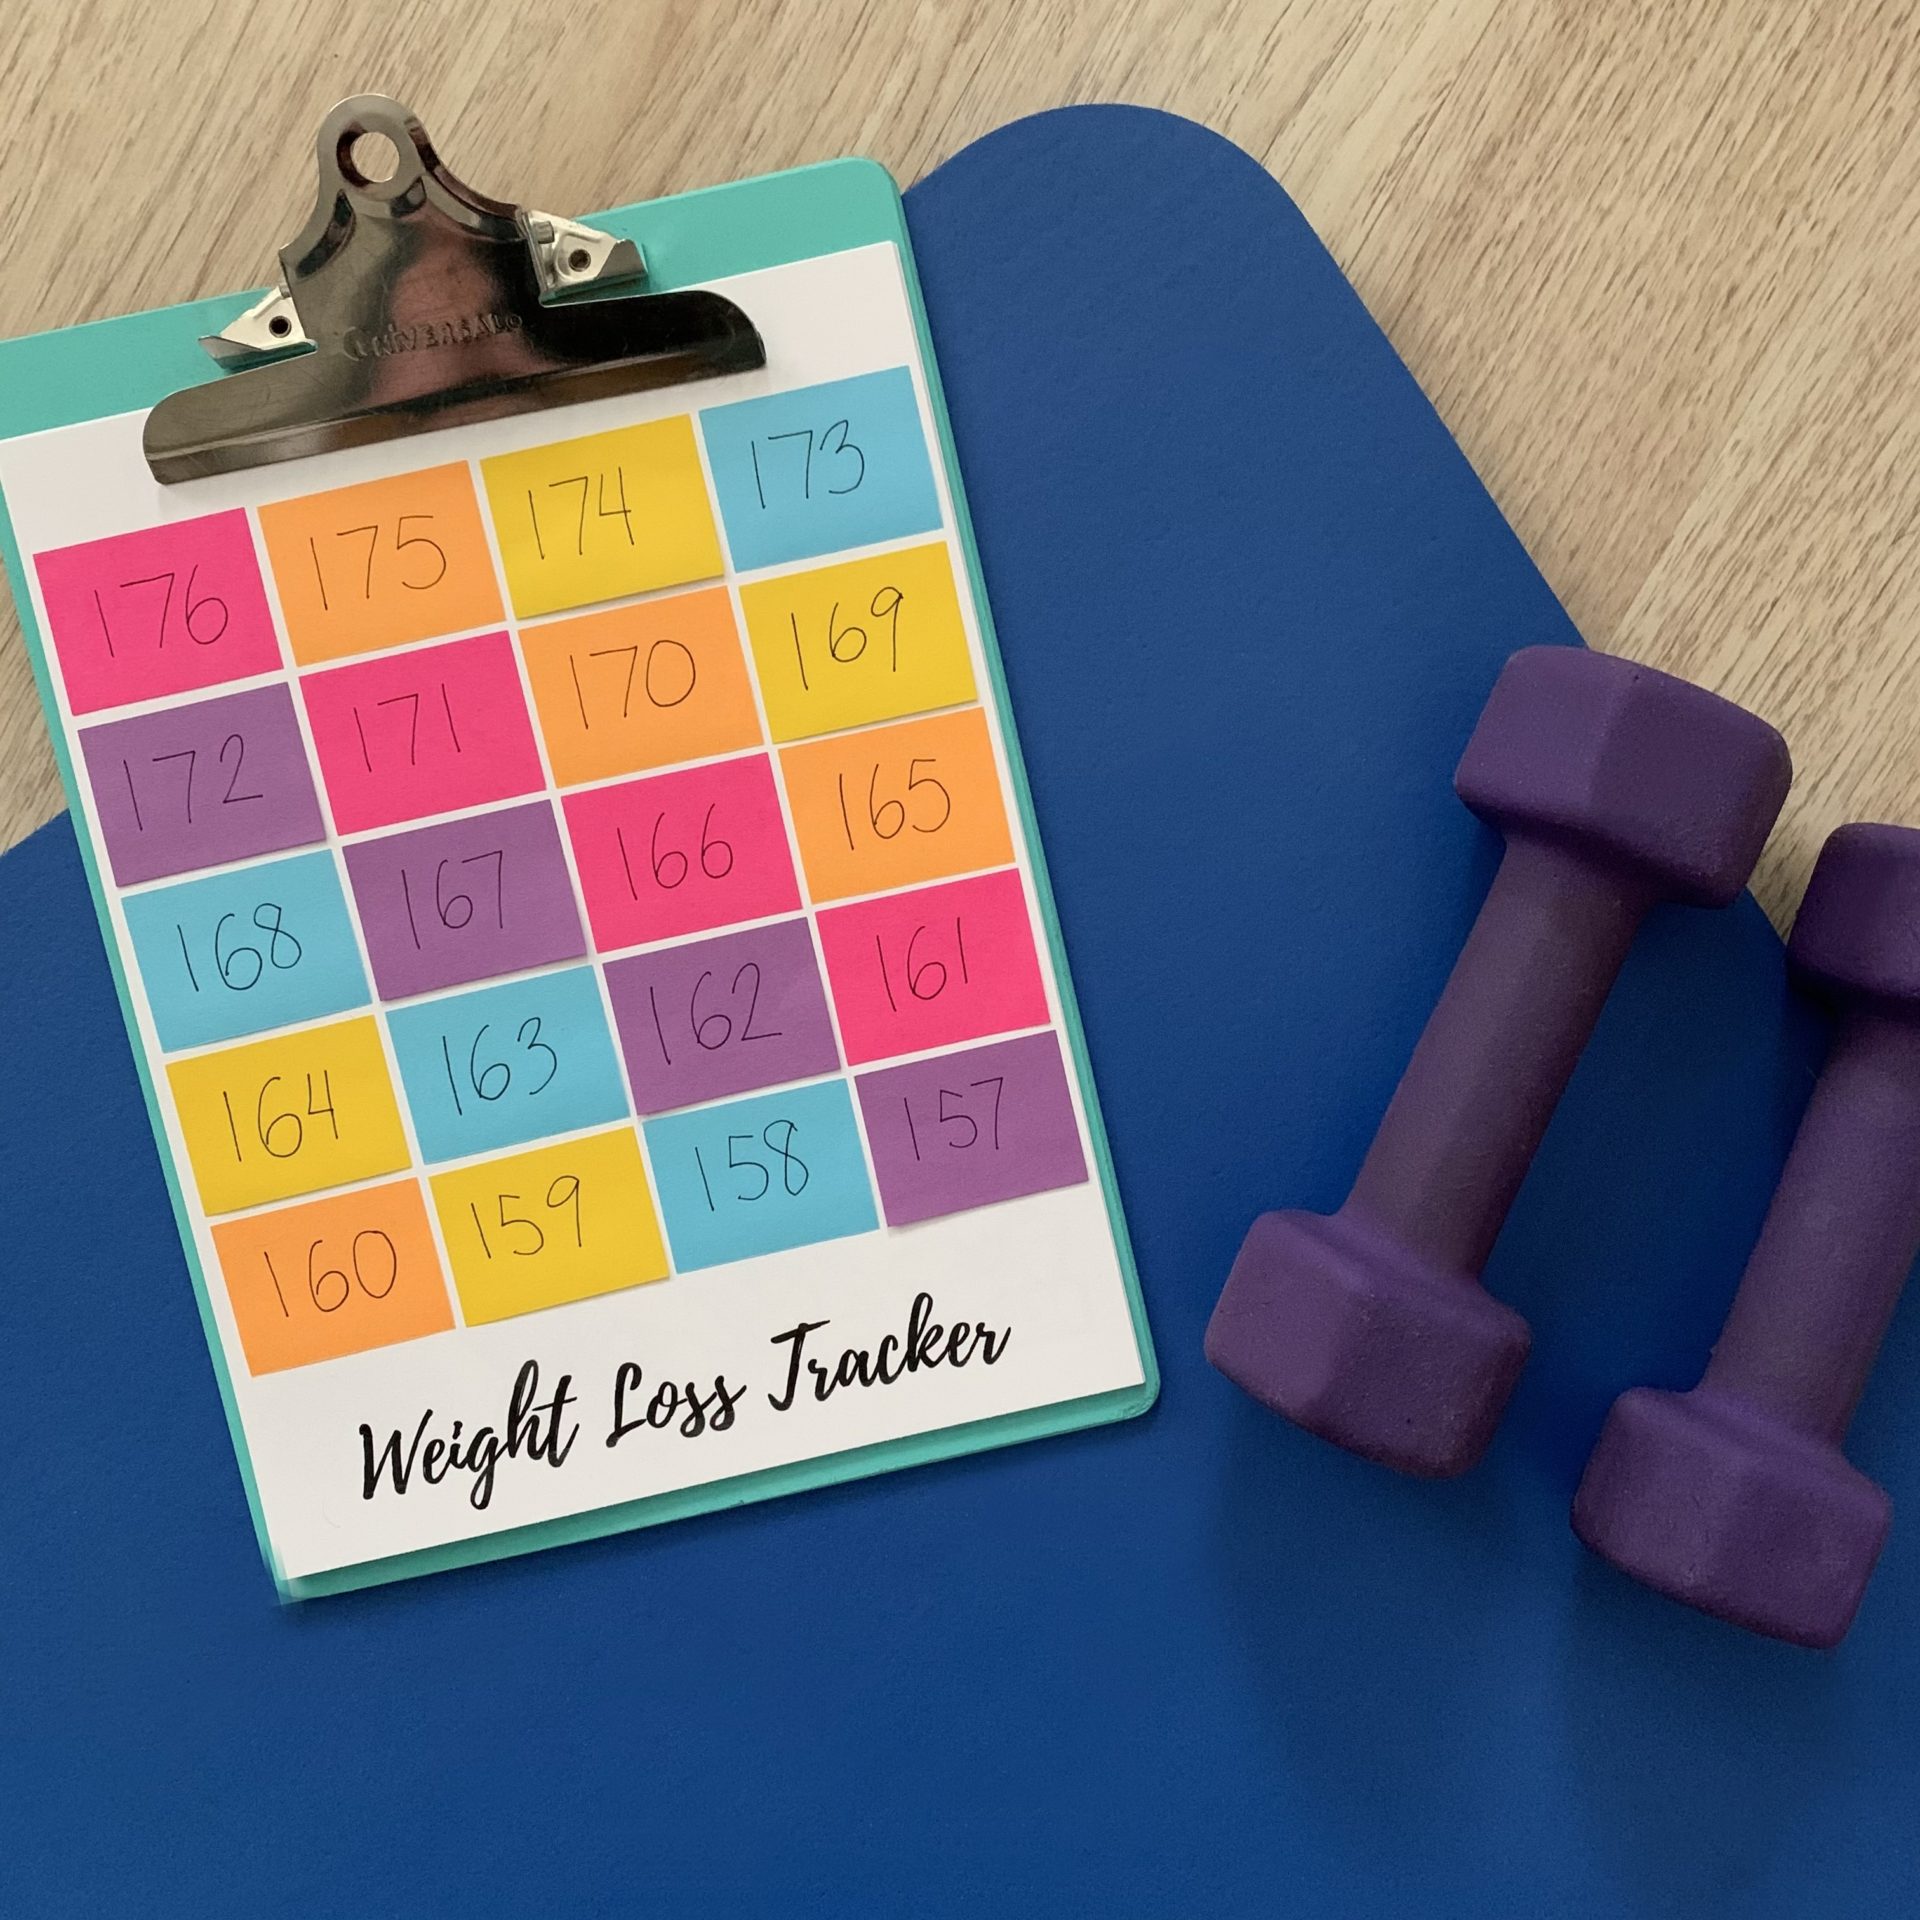 Weight Tracker - My Printable Home